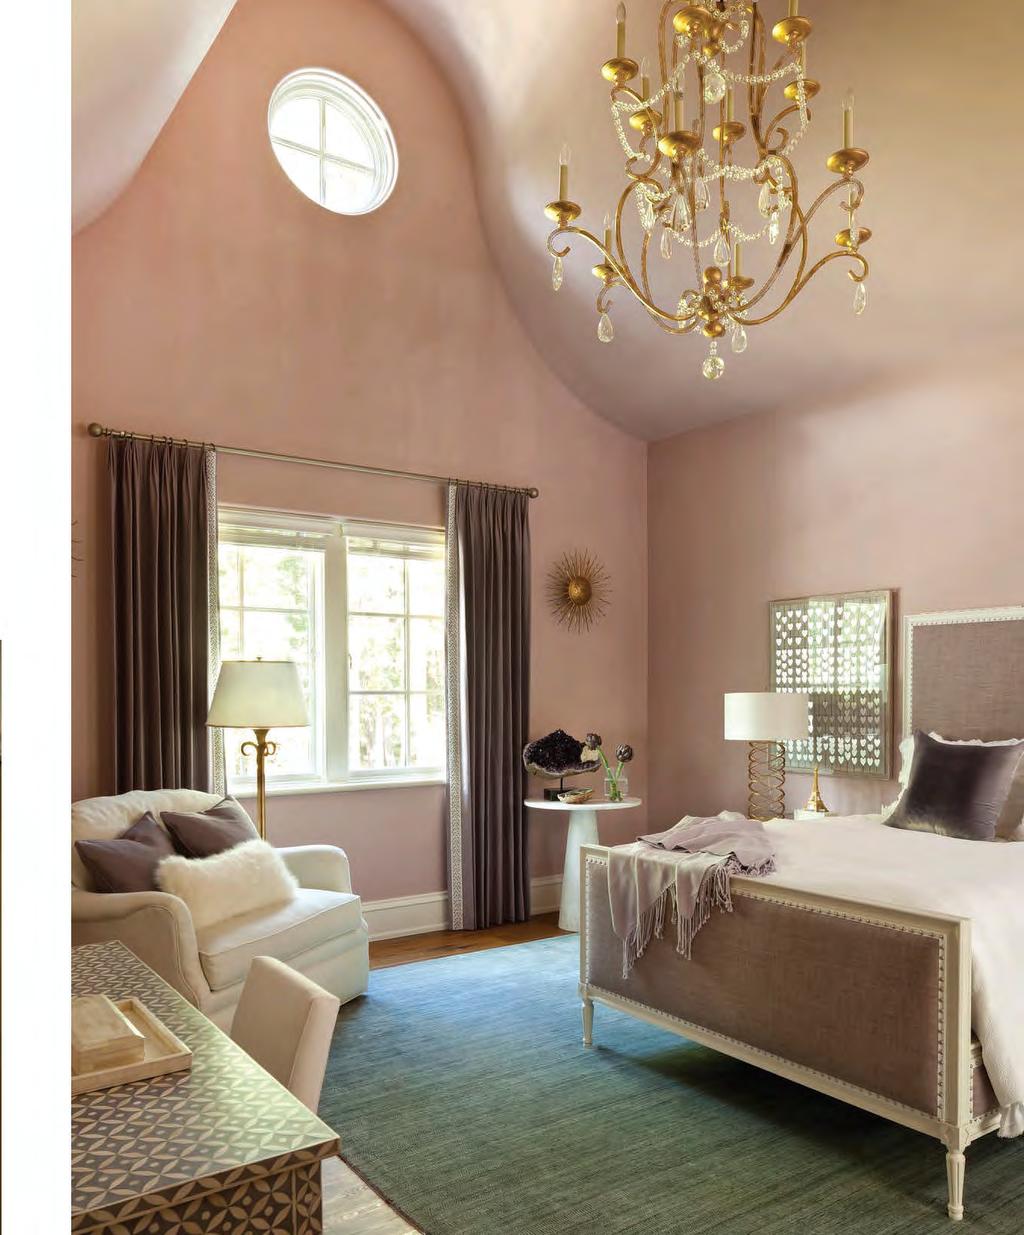 This pretty-in-pink bedroom, painted Sonoma Clay by